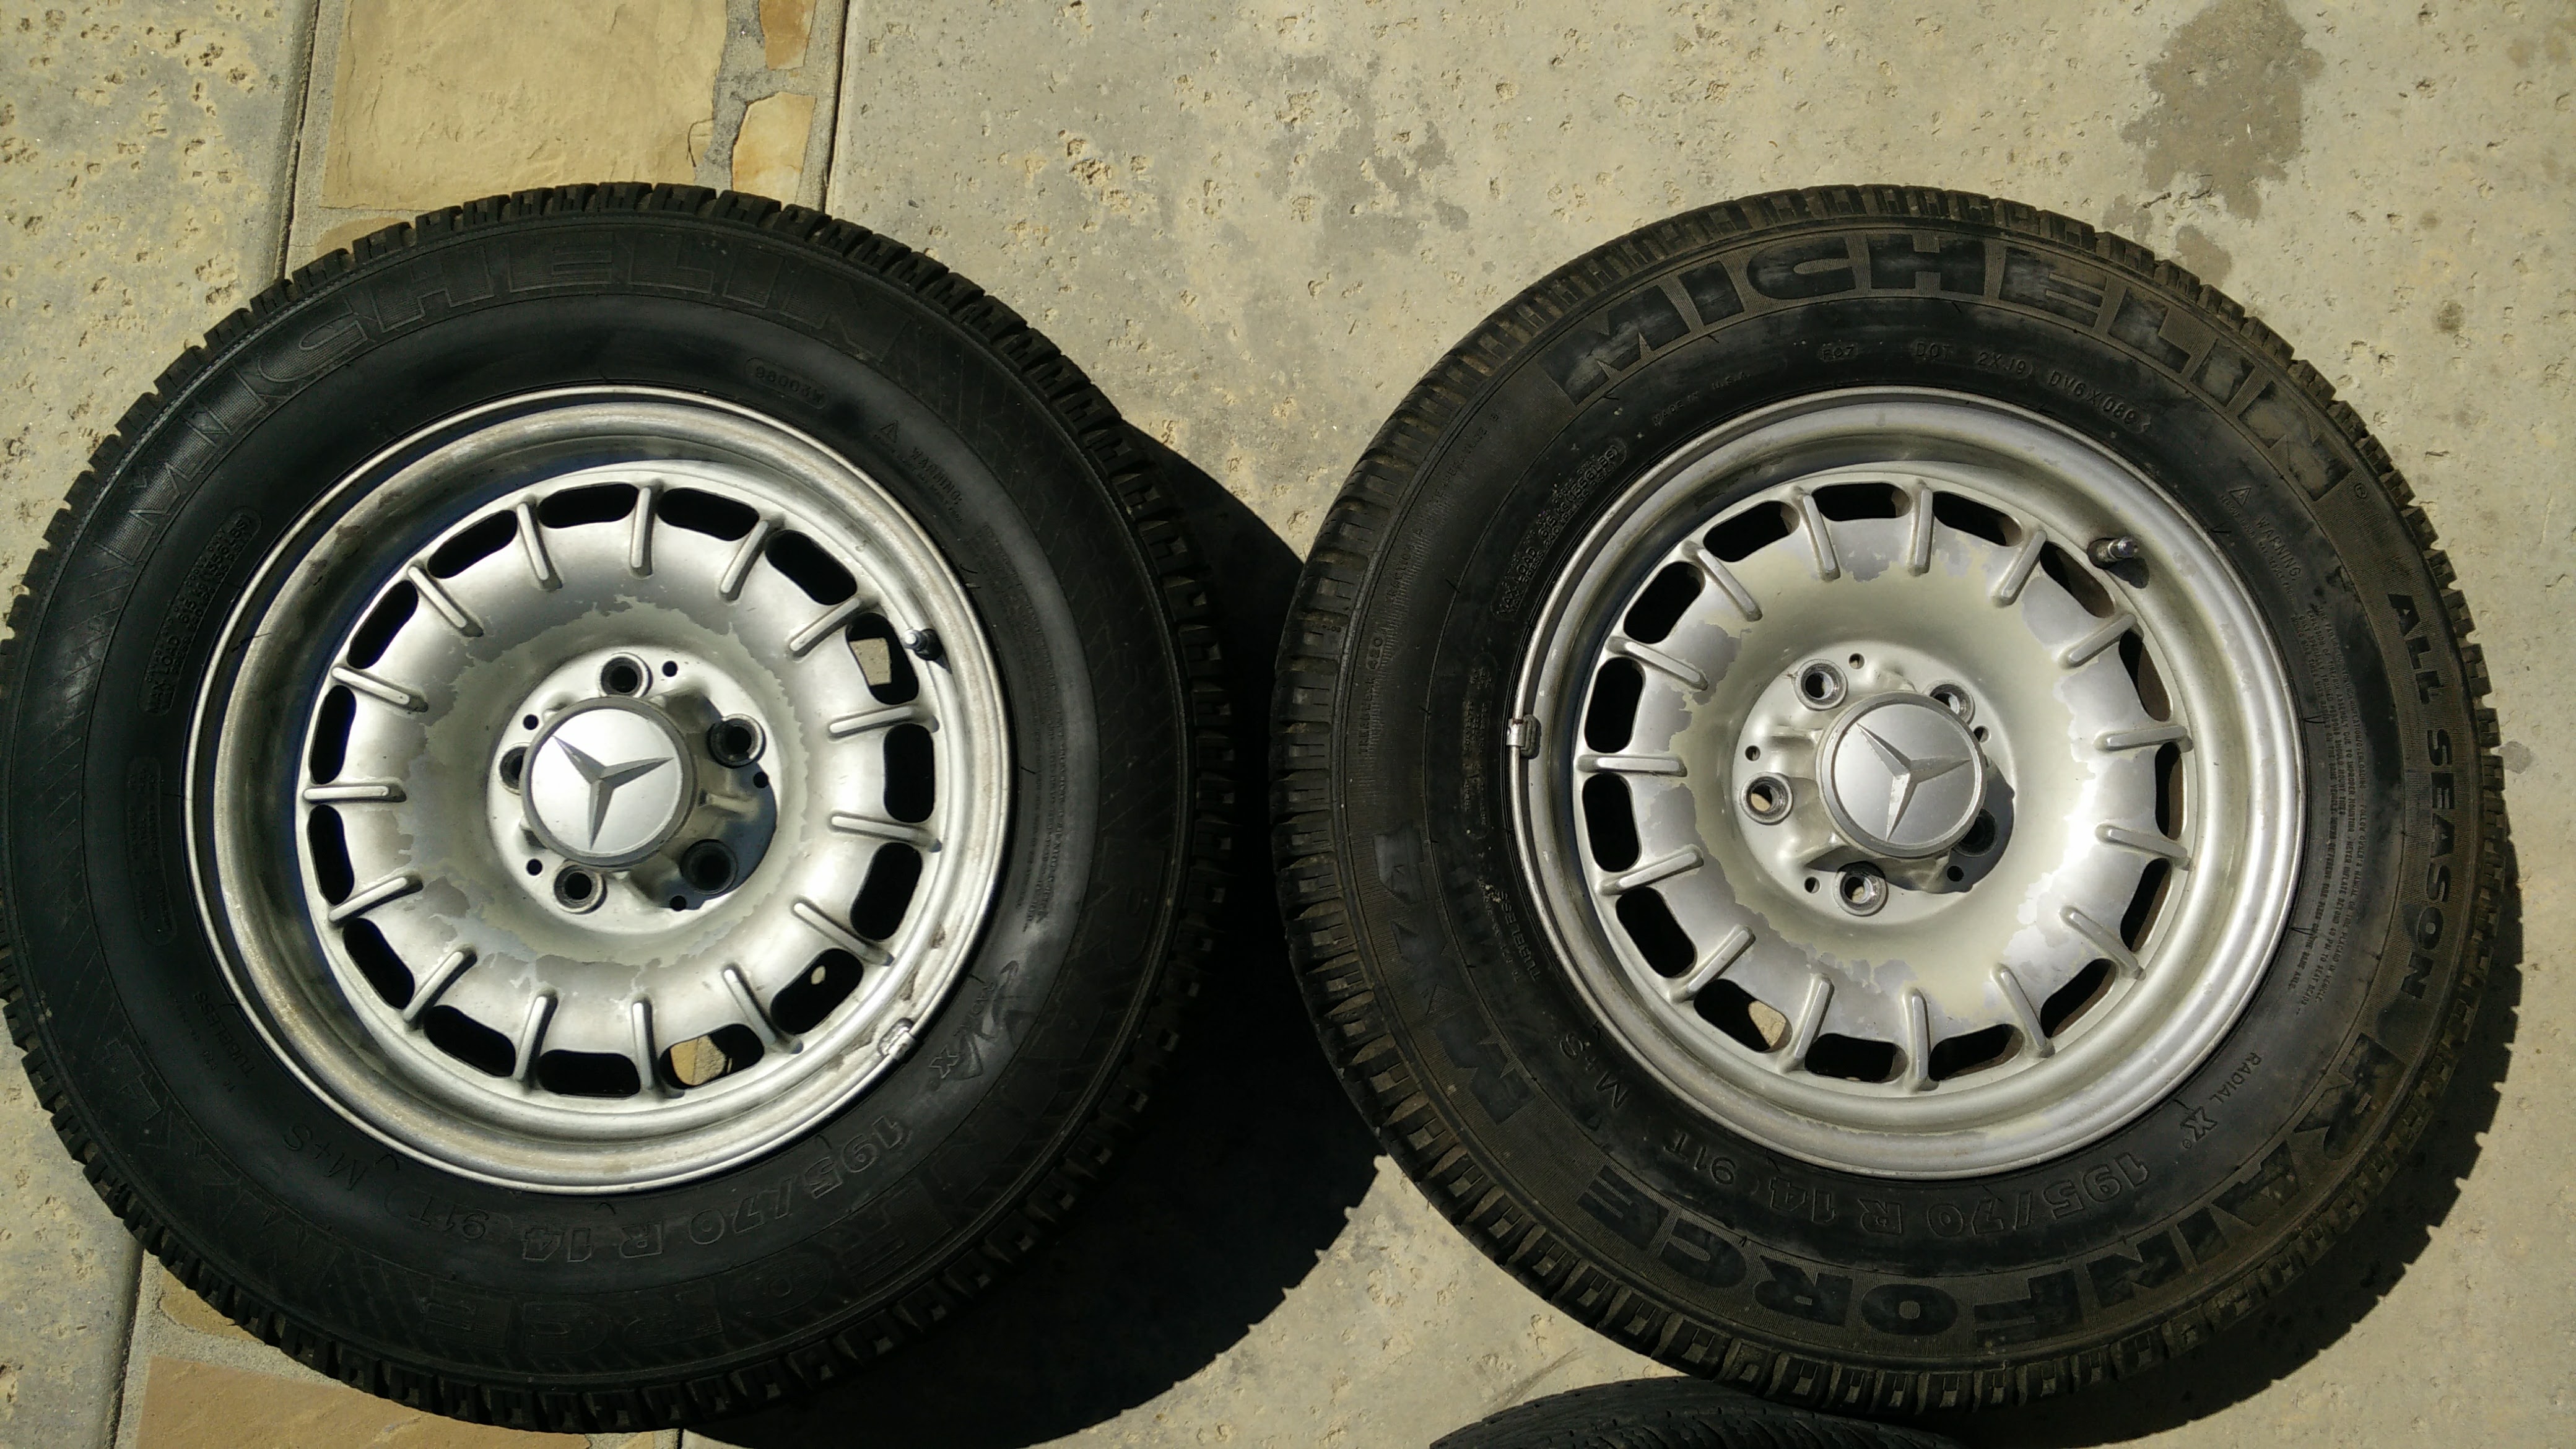 Mercedes Bundt 14 inch wheels and tires Forums